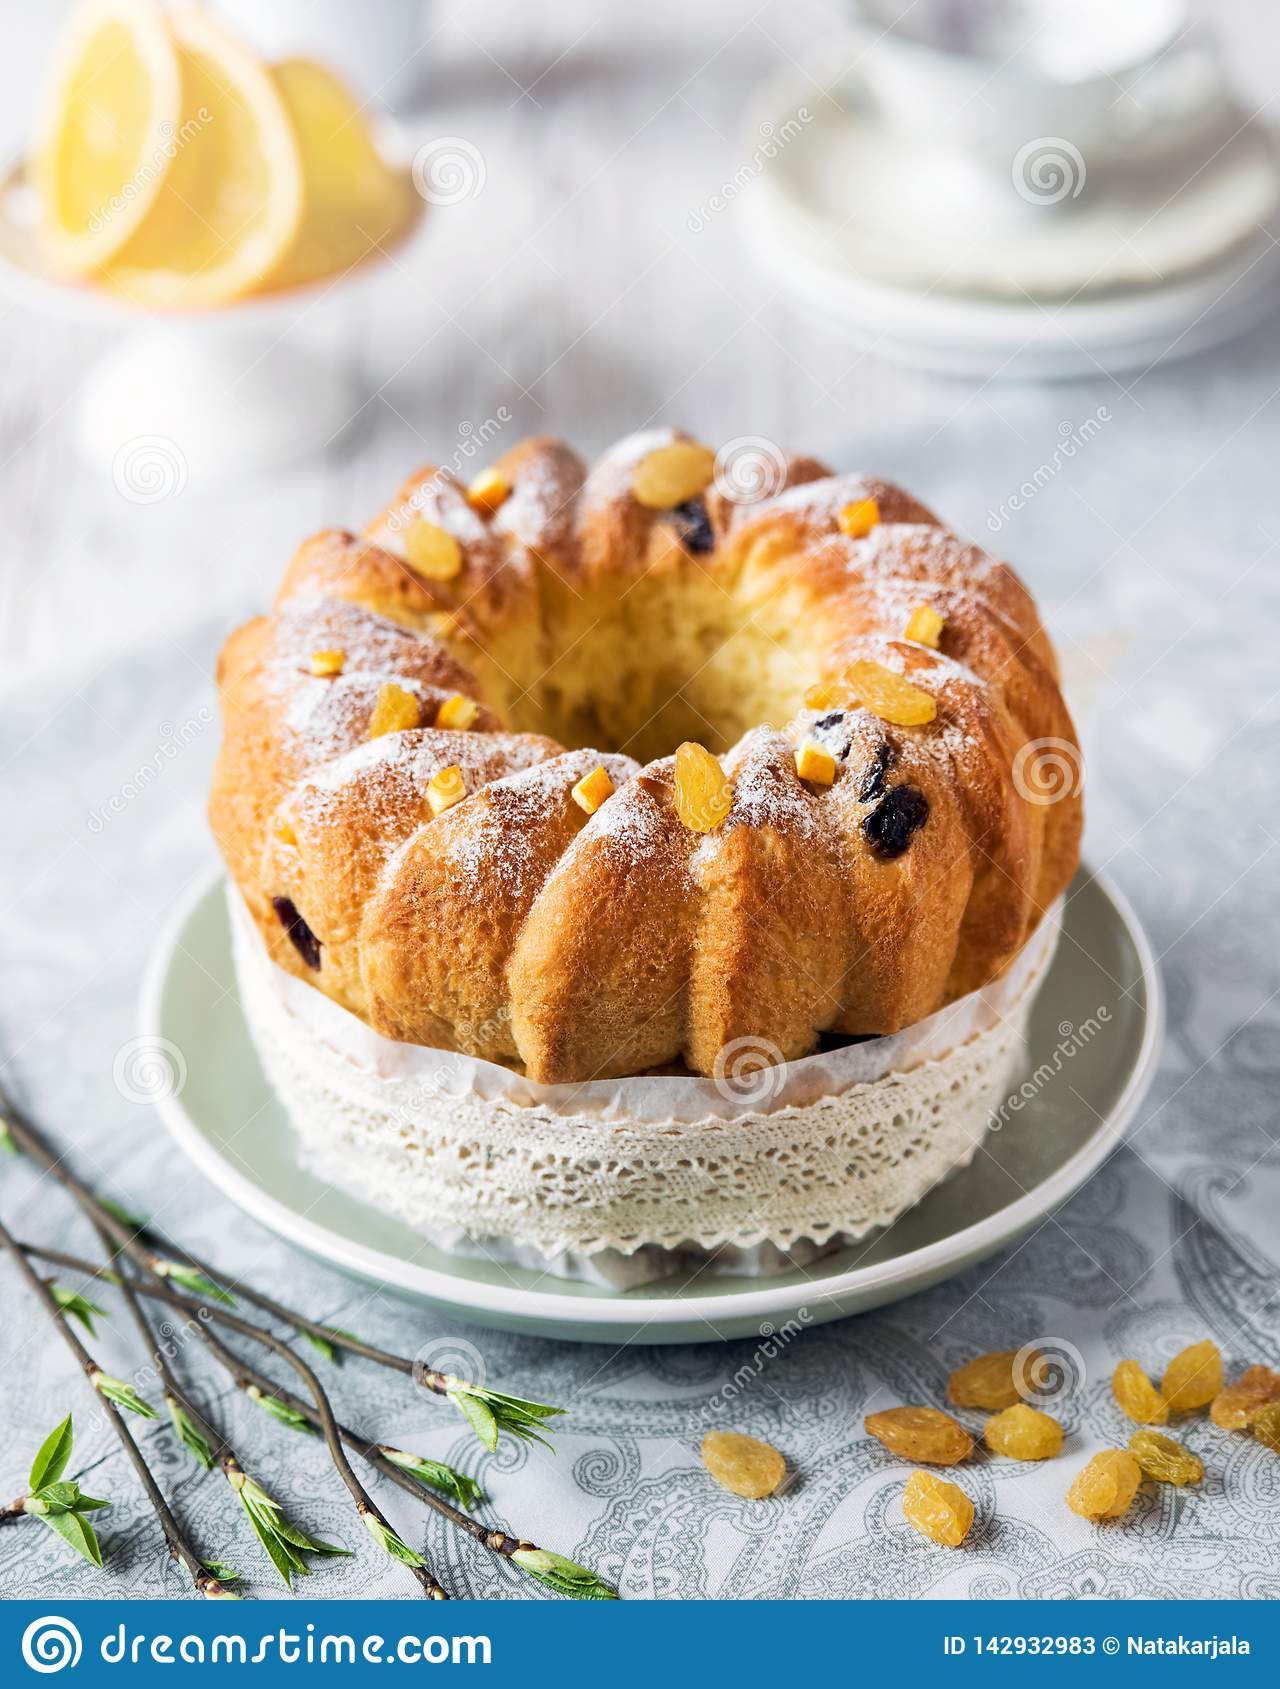 Easter Bread With Raisins
 Easter Bread With Oranges And Raisins Fresh Spring